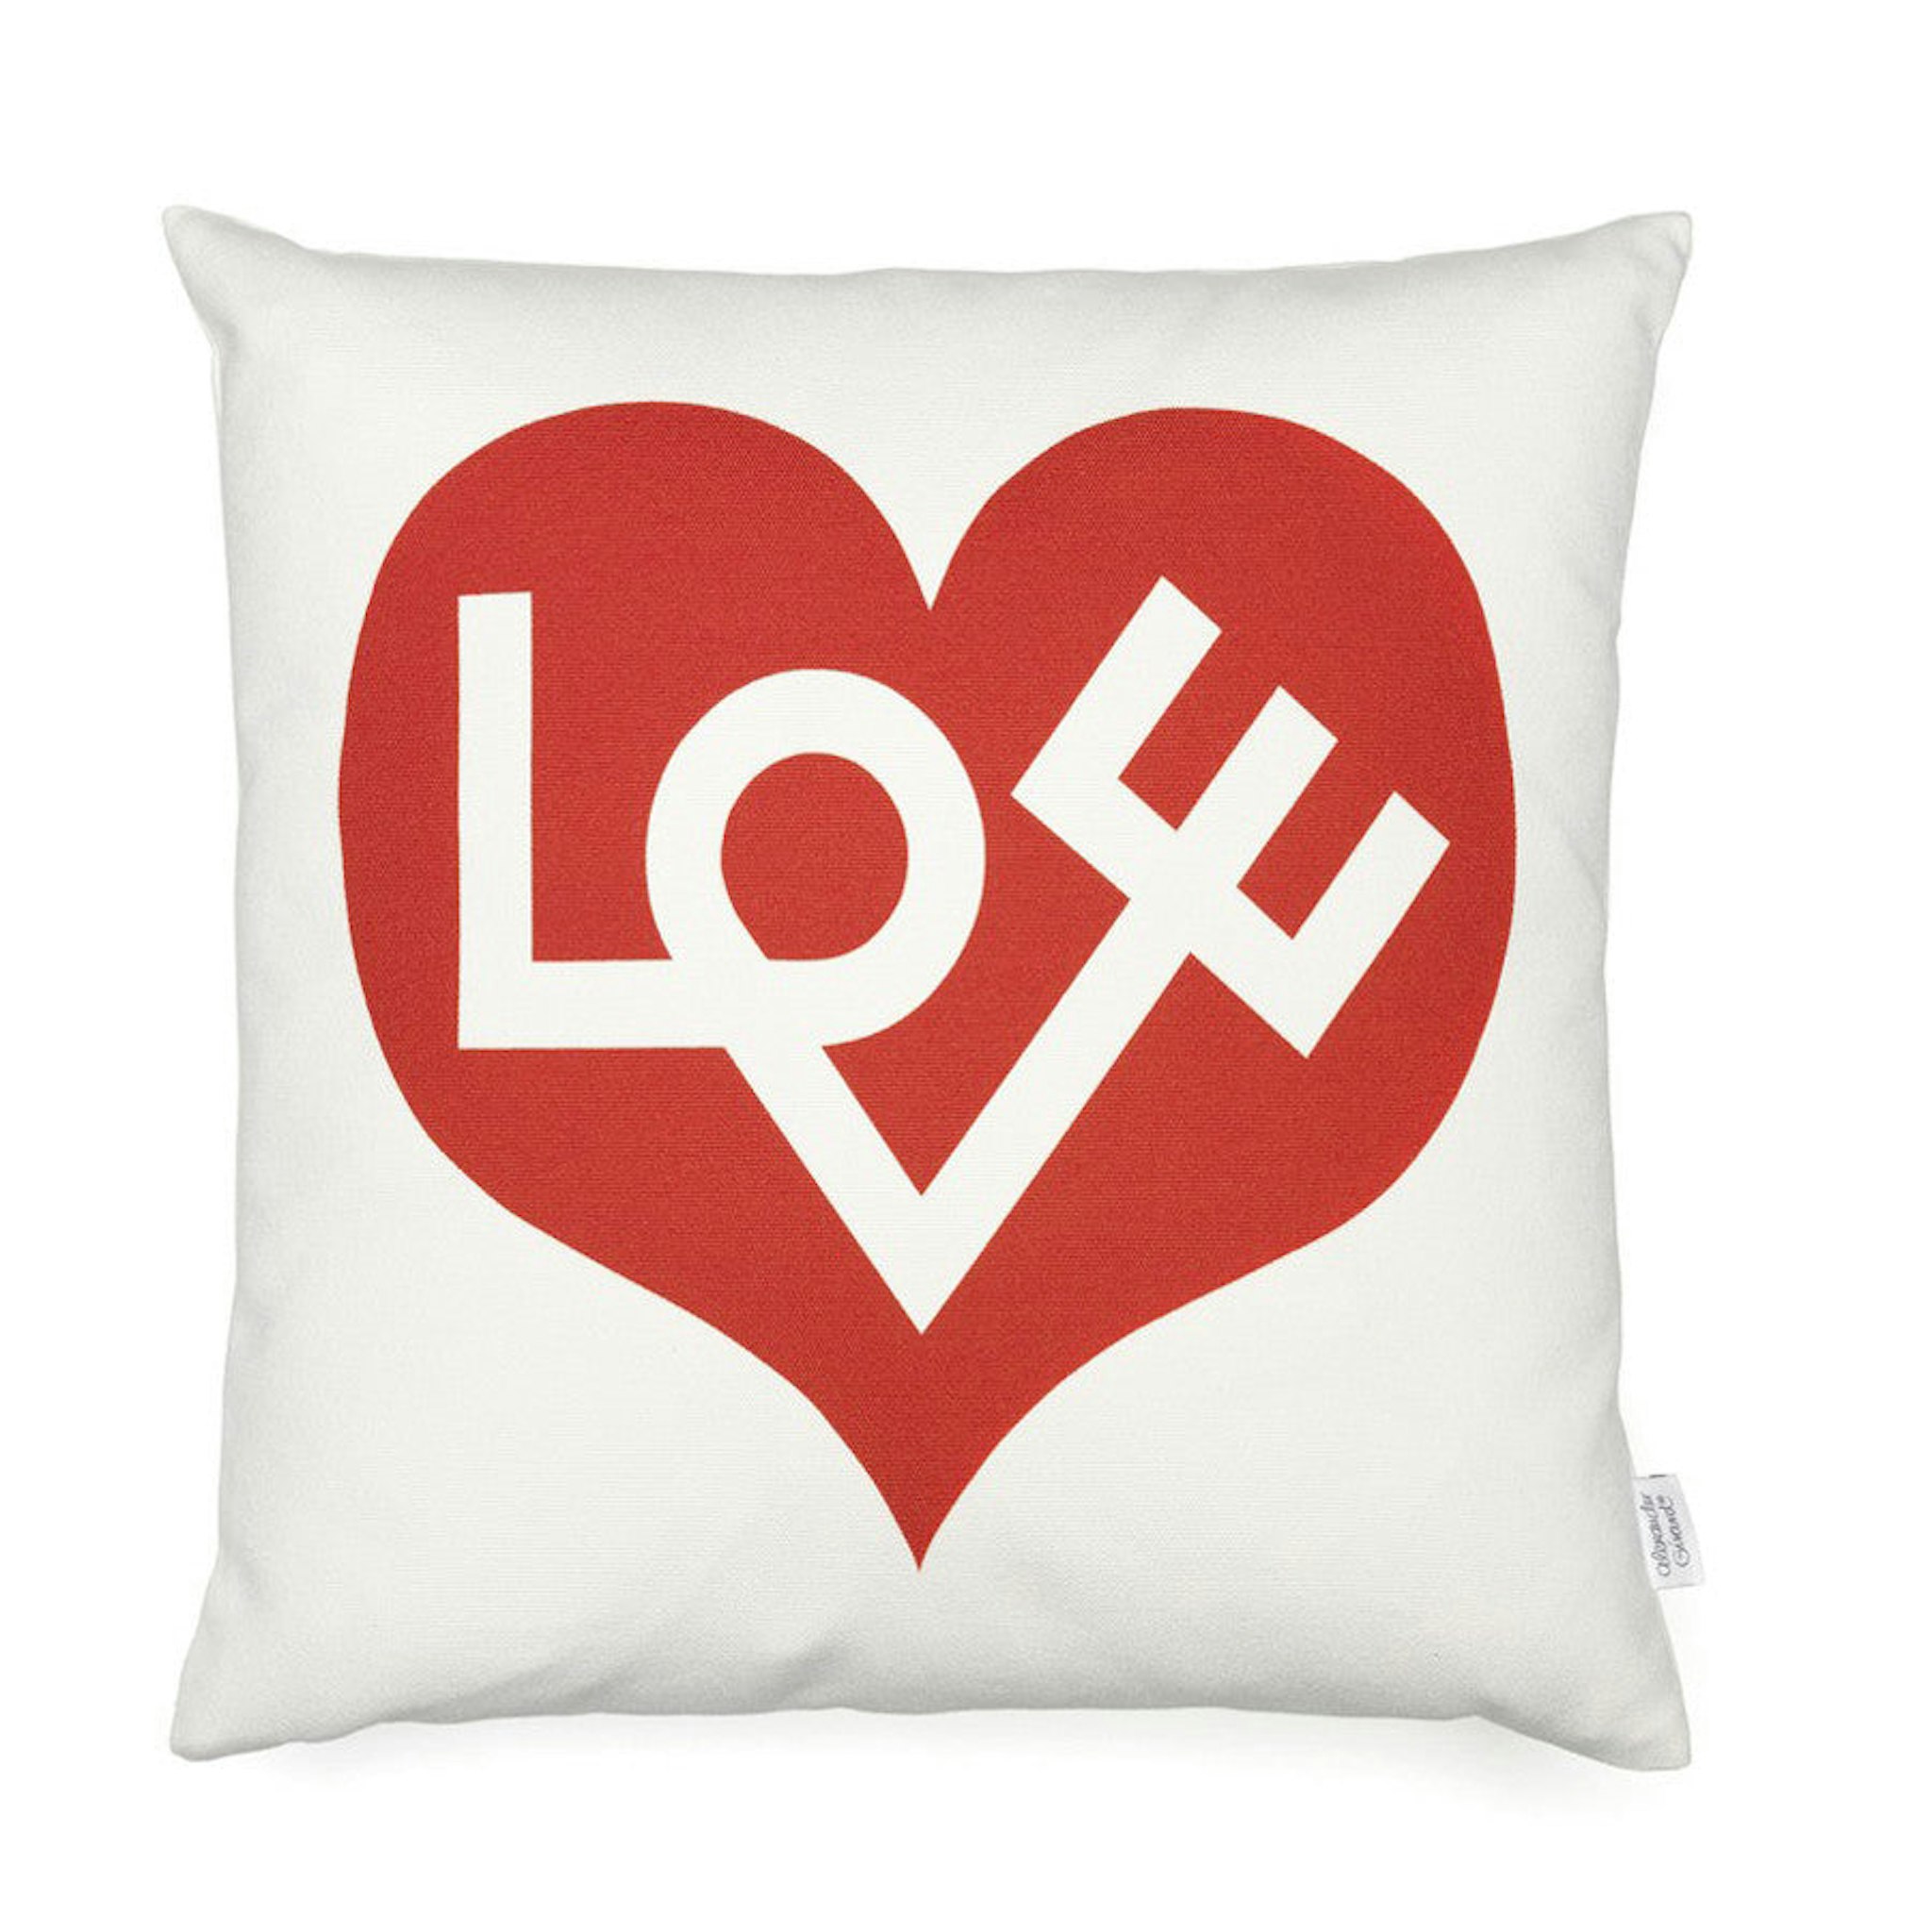 Graphic Print Pillow - Love by Vitra